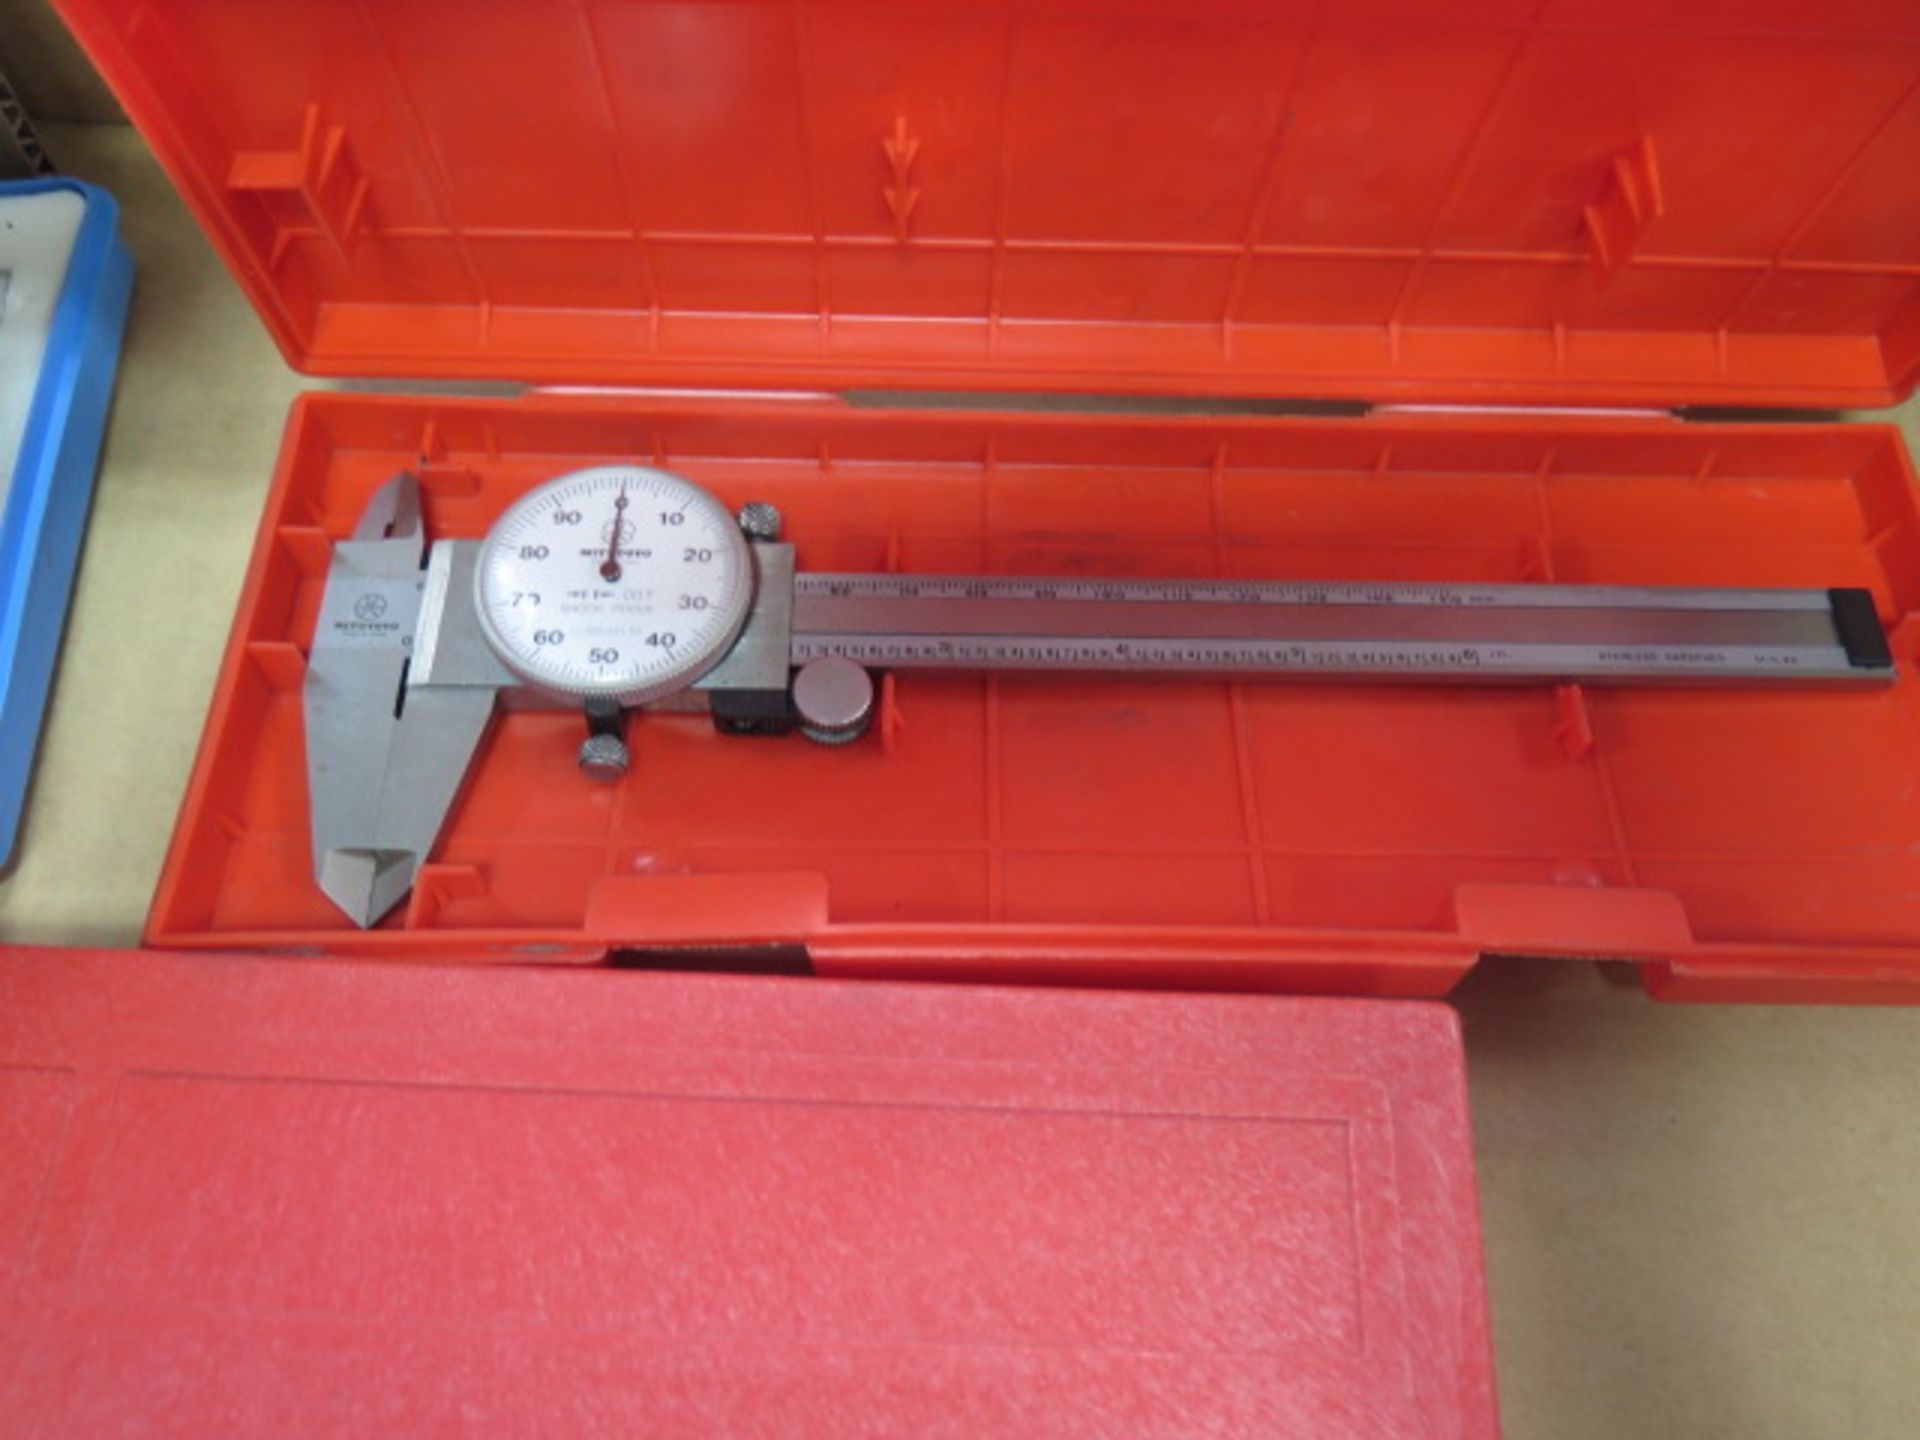 Mitutoyo and Etalon 6” Dial Calipers (2) - Image 2 of 3